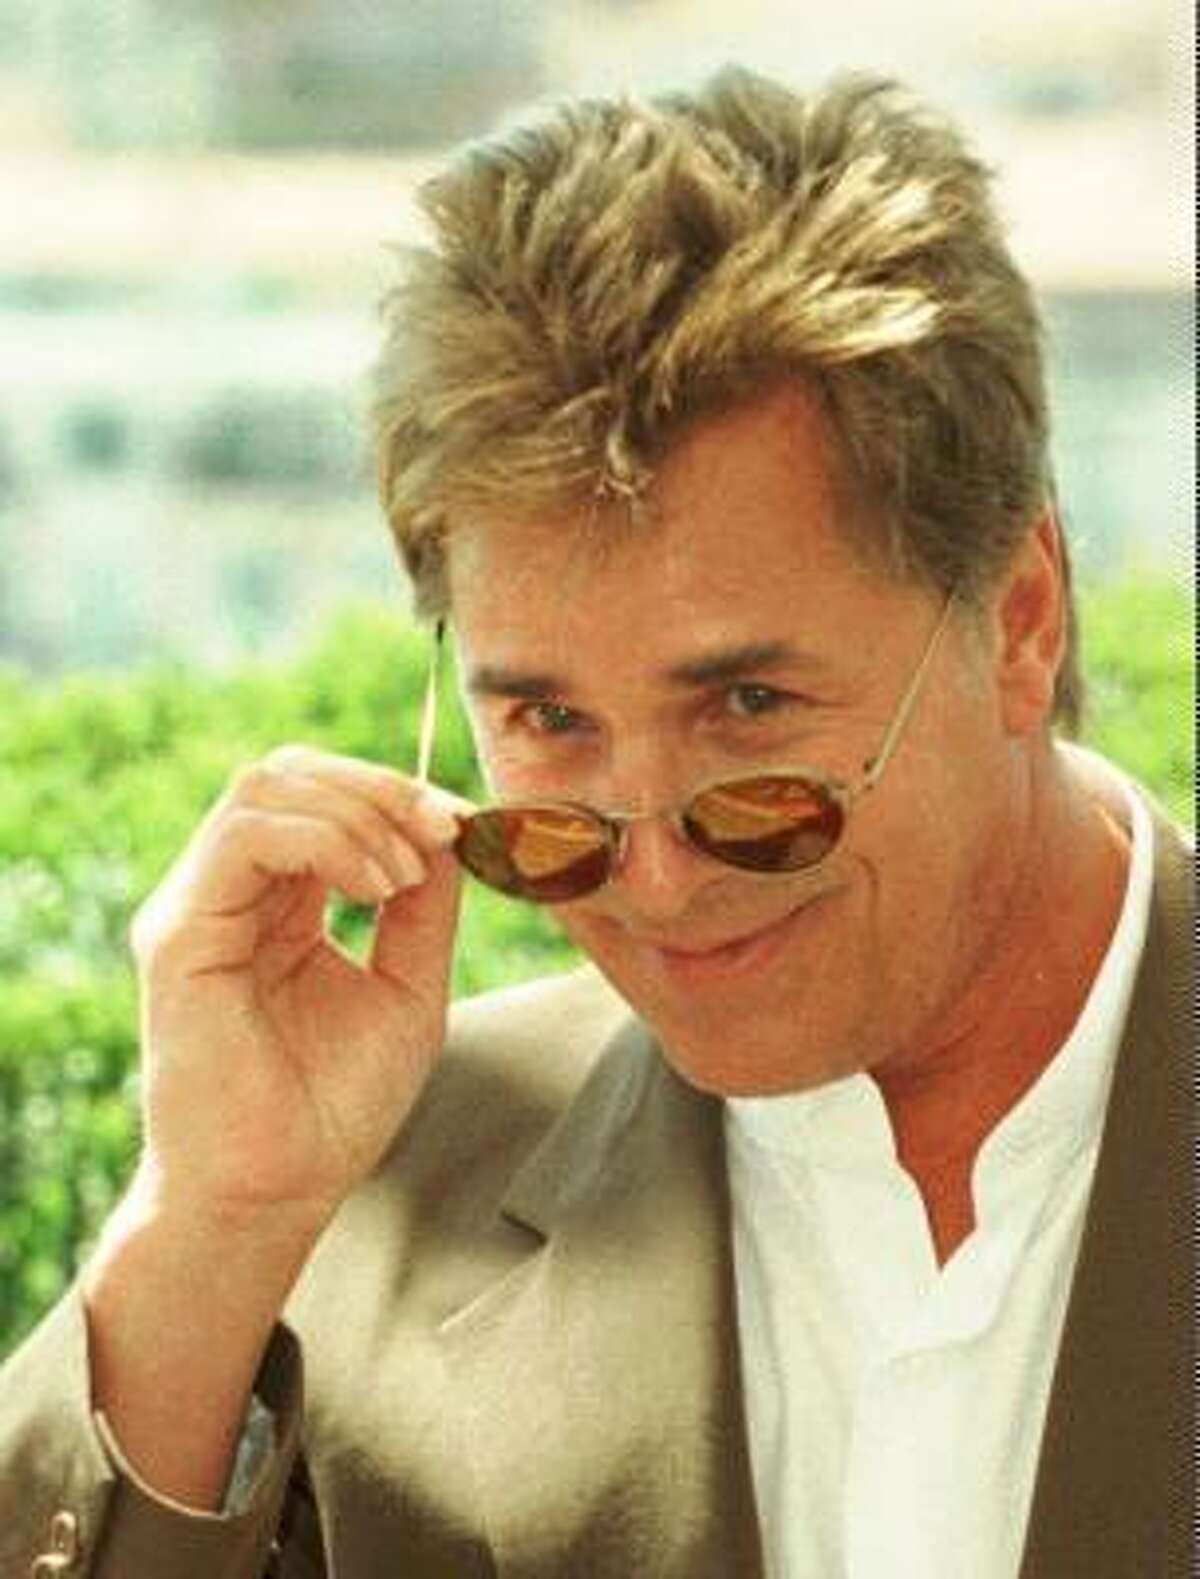 Don Johnson released two albums in the 80s and managed to get one top of the charts hit, Heartbeat. How he did it? No one will ever know.